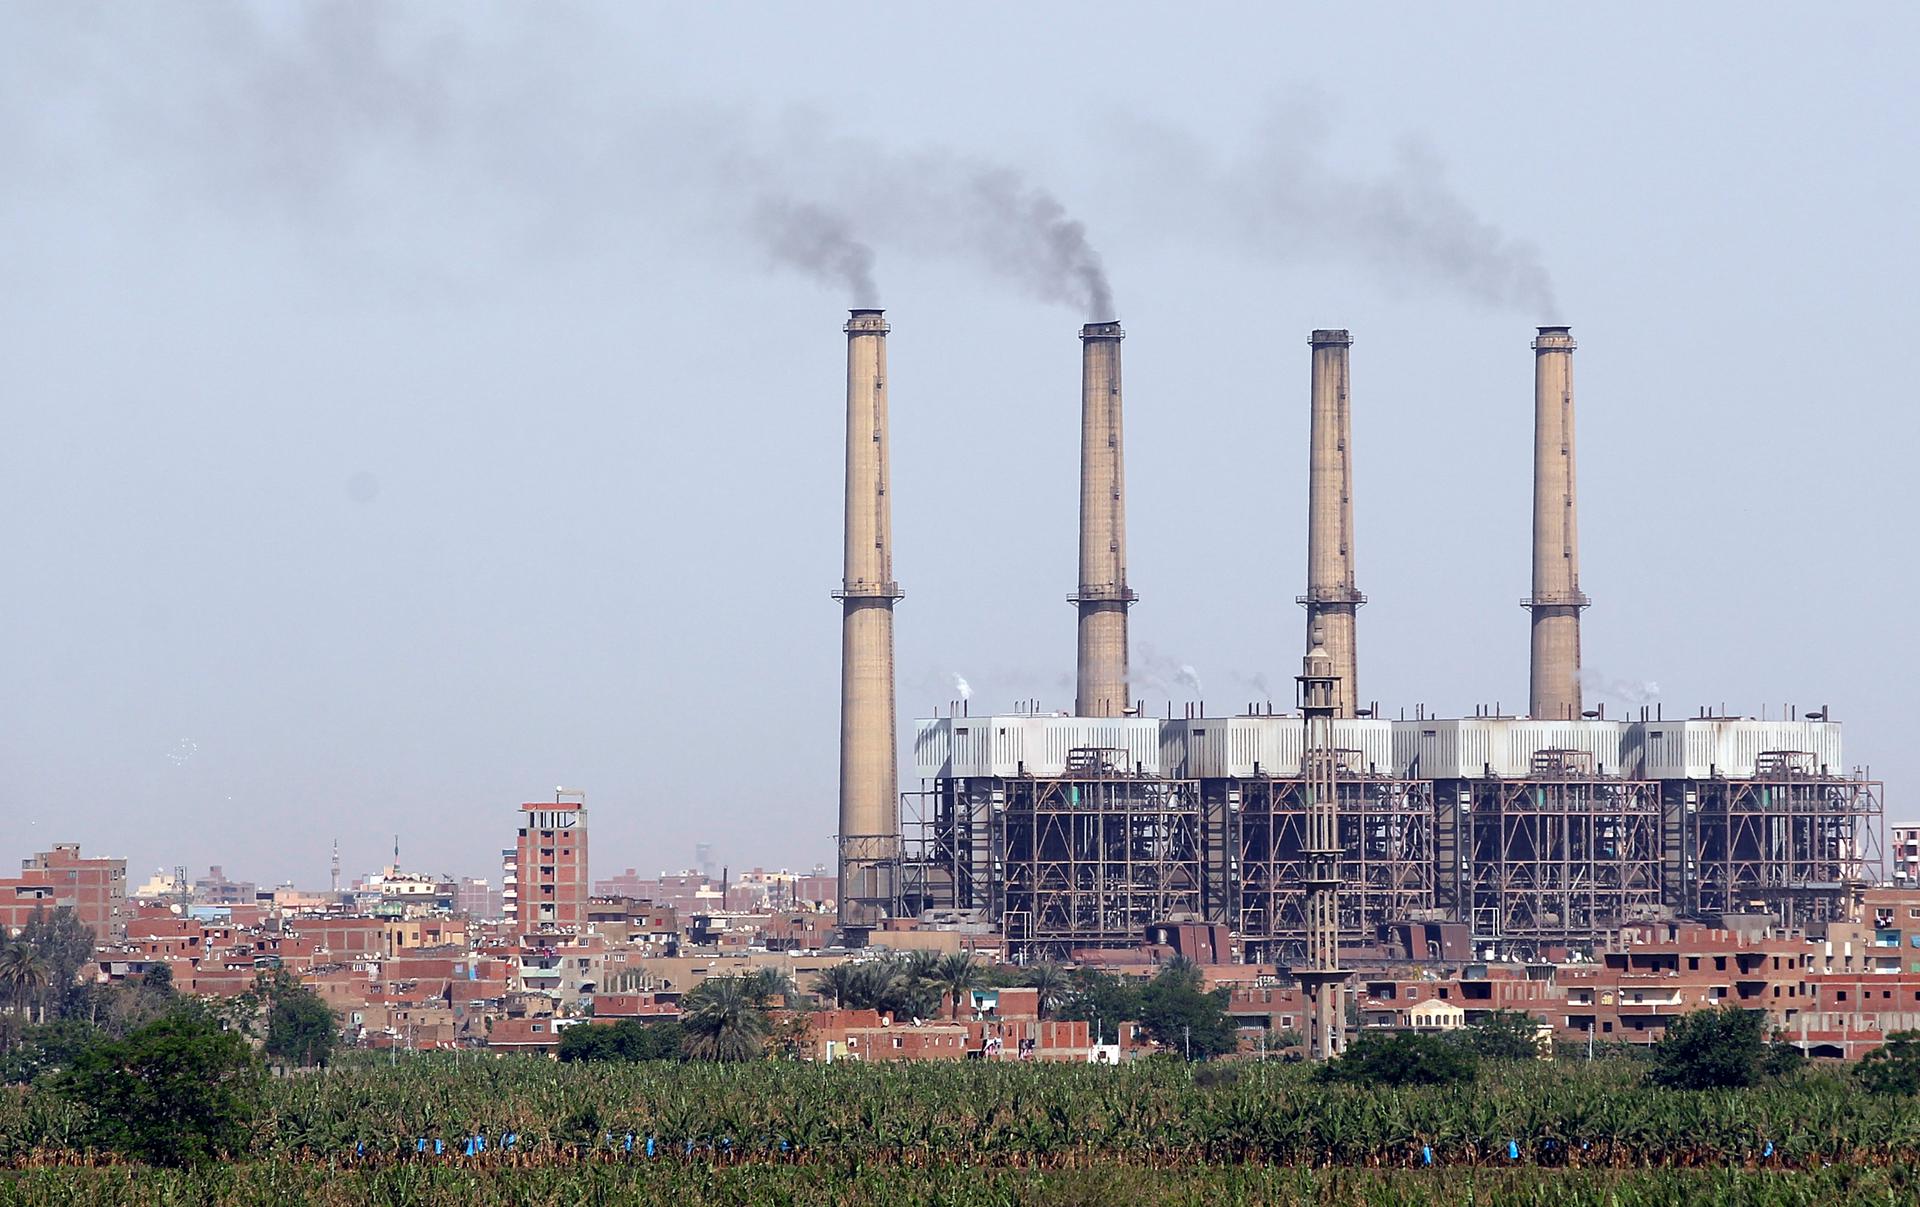 Shoubra El-Kheima Power Station, belonging to the North Cairo Electricity Distribution Company, is pictured in Cairo, April 19, 2014. Egypt needs to find at least $5 billion to invest in its dilapidated power grid, a government official told Reuters.